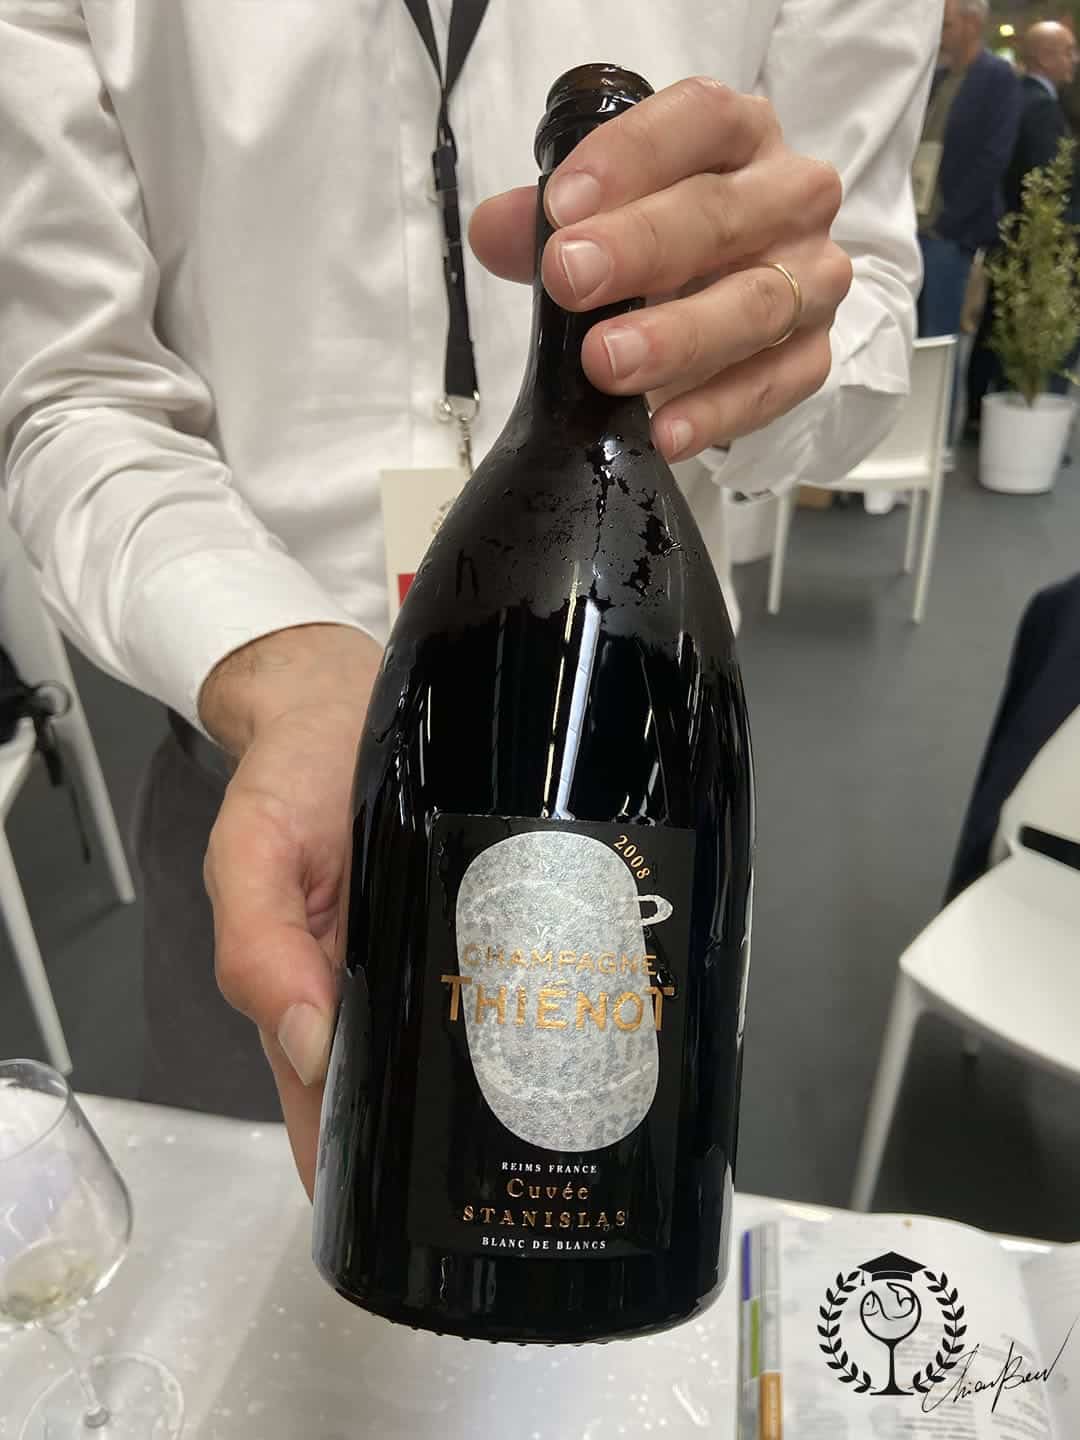 Modena champagne experience 2022